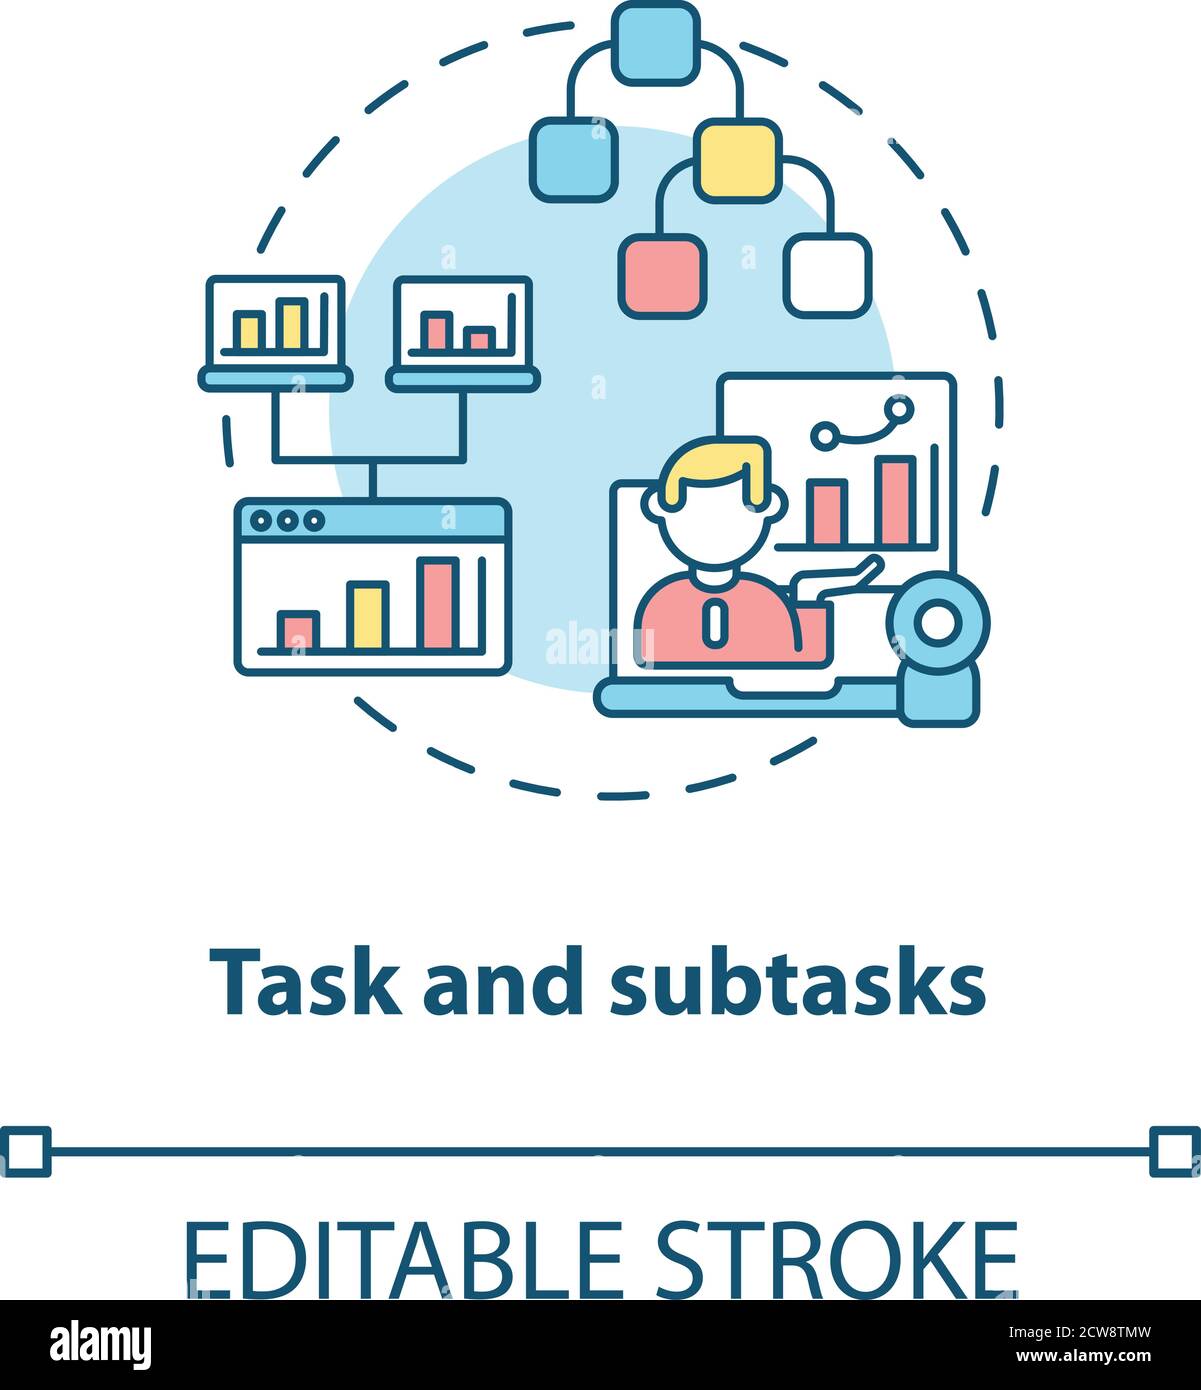 Task and subtasks concept icon Stock Vector